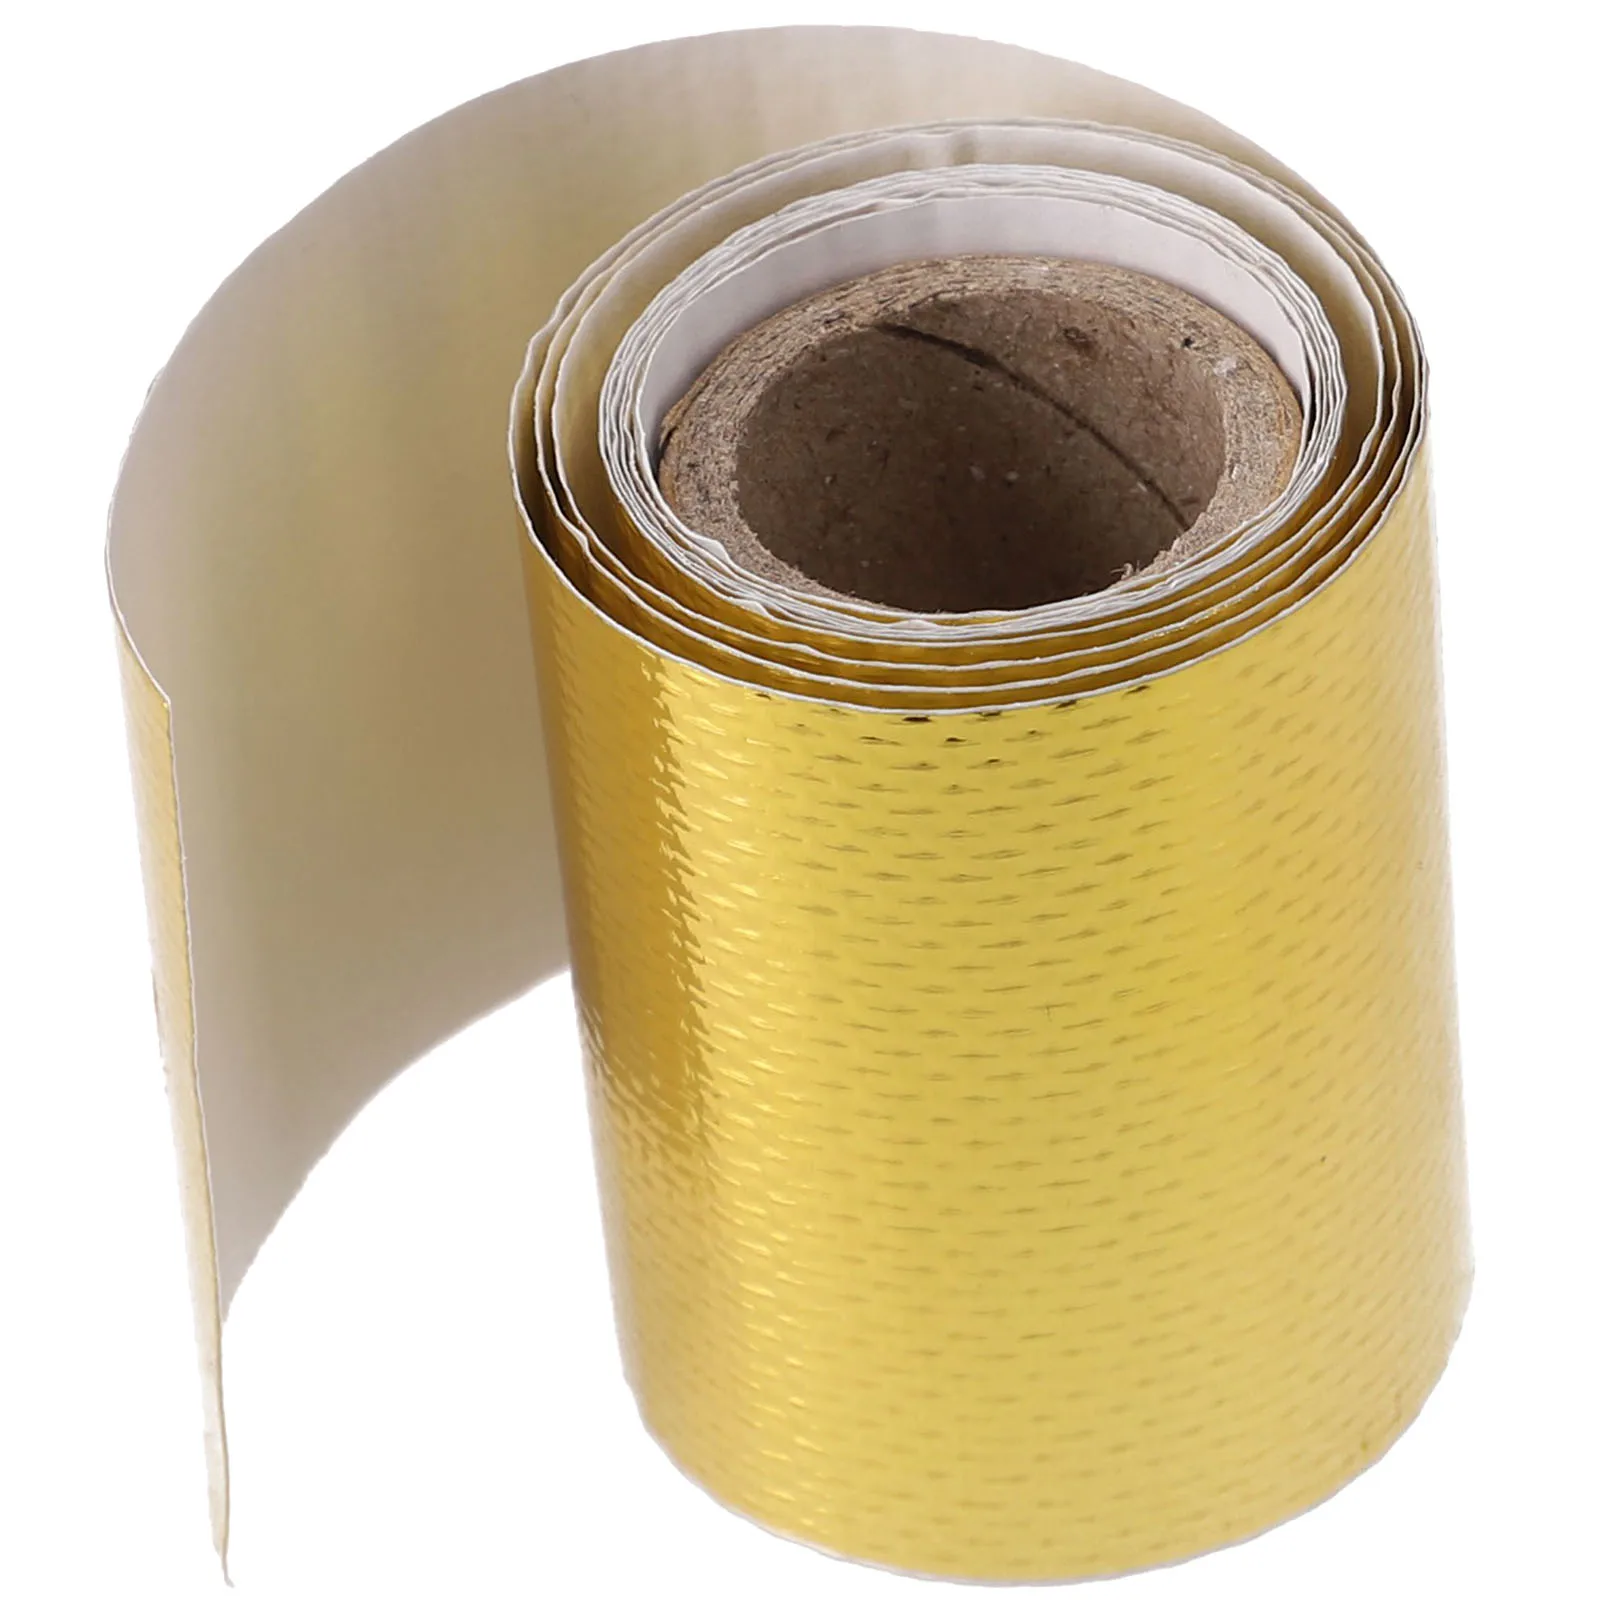 

1 Roll Car Thermal Exhaust Tape Air Intake Heat Insulation Shield Wrap Reflective Heat Barrier Self Adhesive Engine